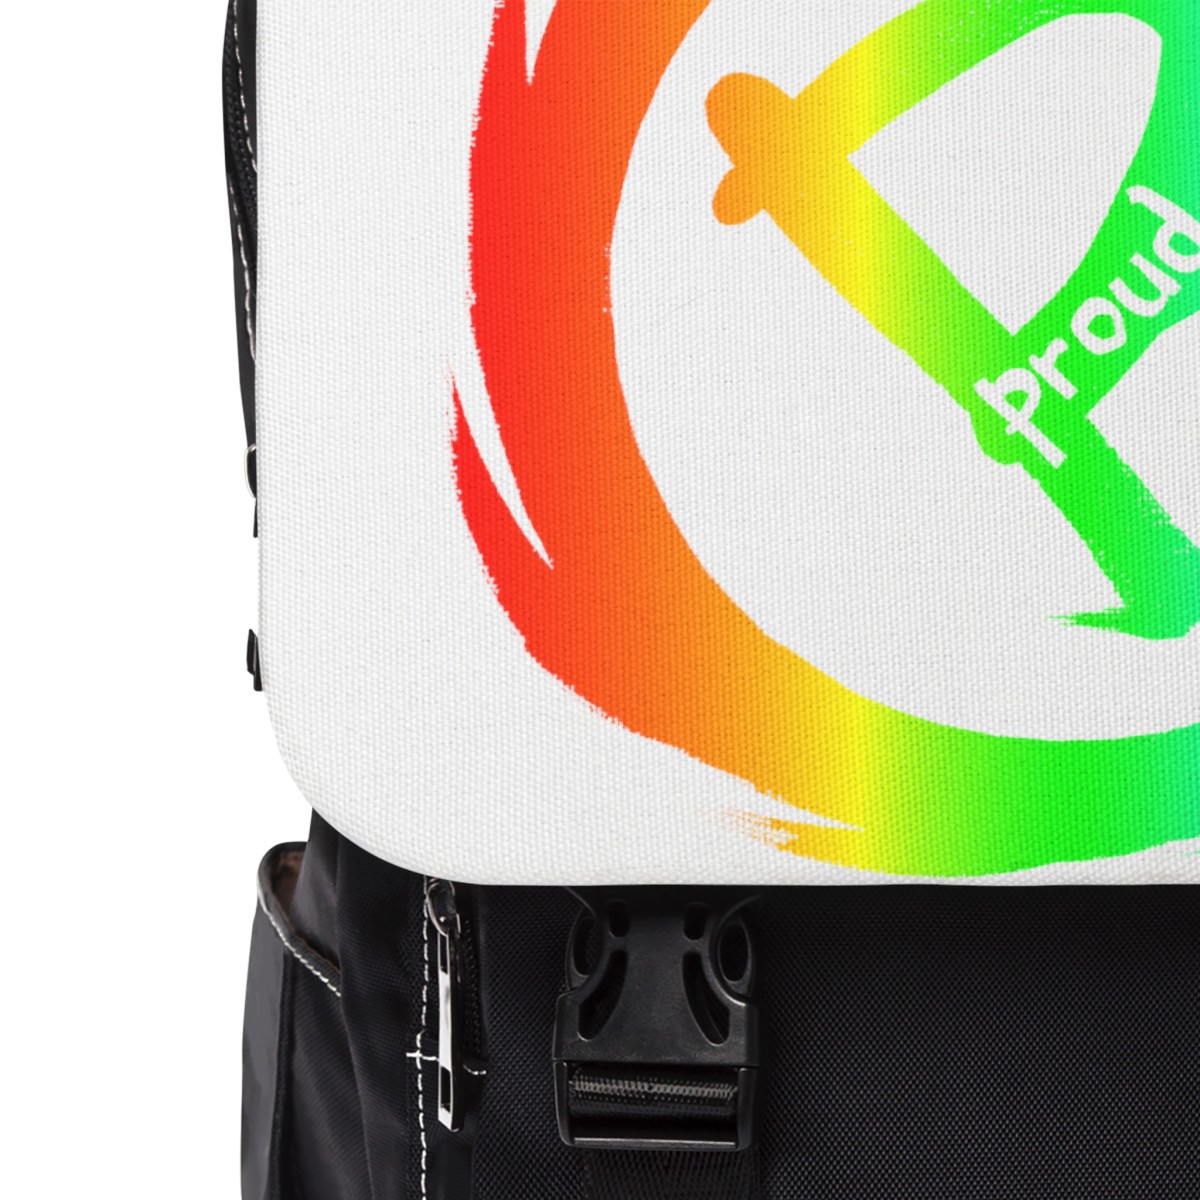 Casual Shoulder Backpack Rainbow B proud White Flap product thumbnail image